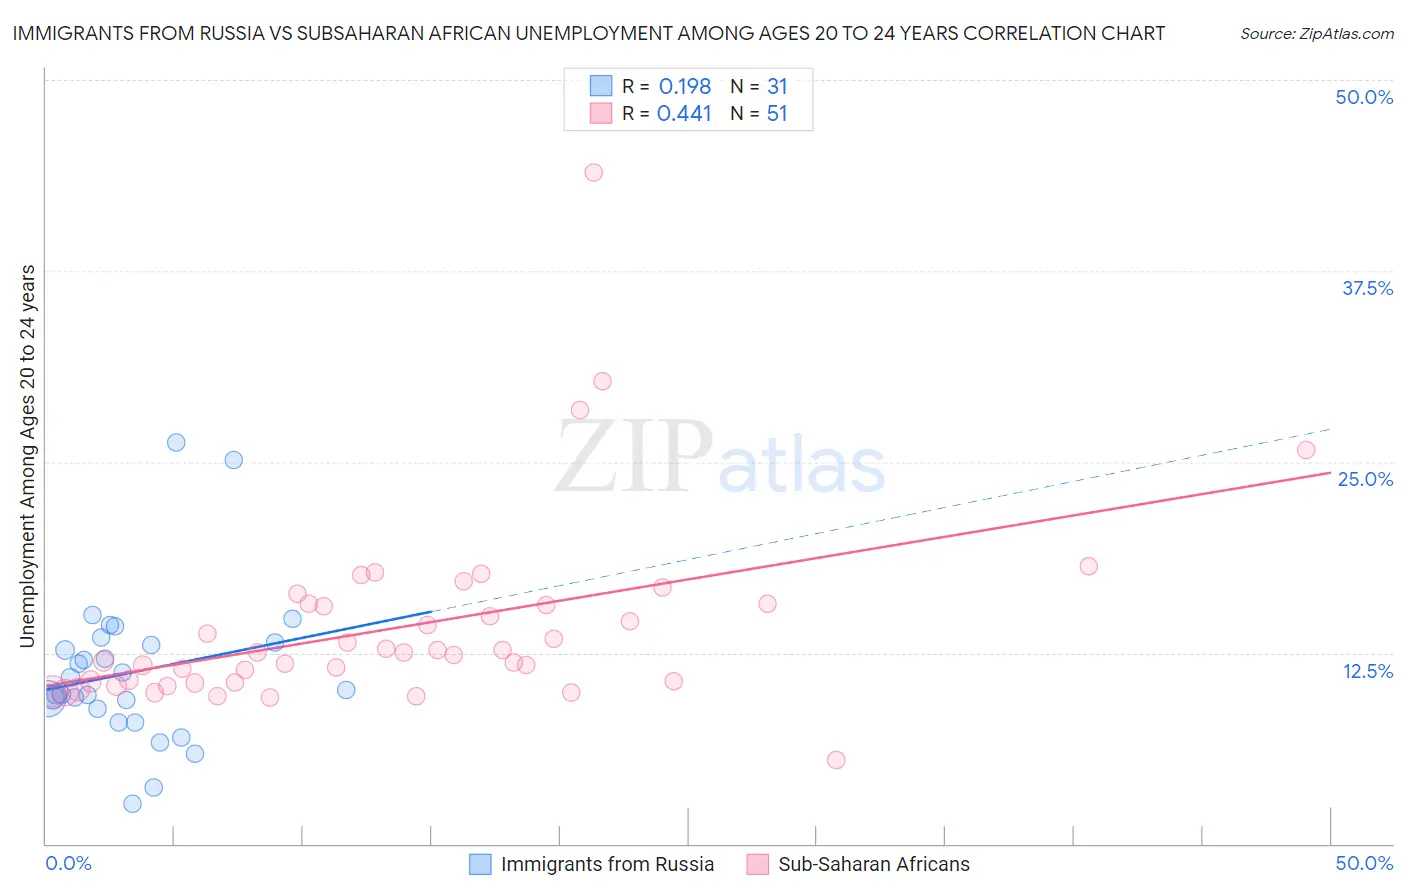 Immigrants from Russia vs Subsaharan African Unemployment Among Ages 20 to 24 years